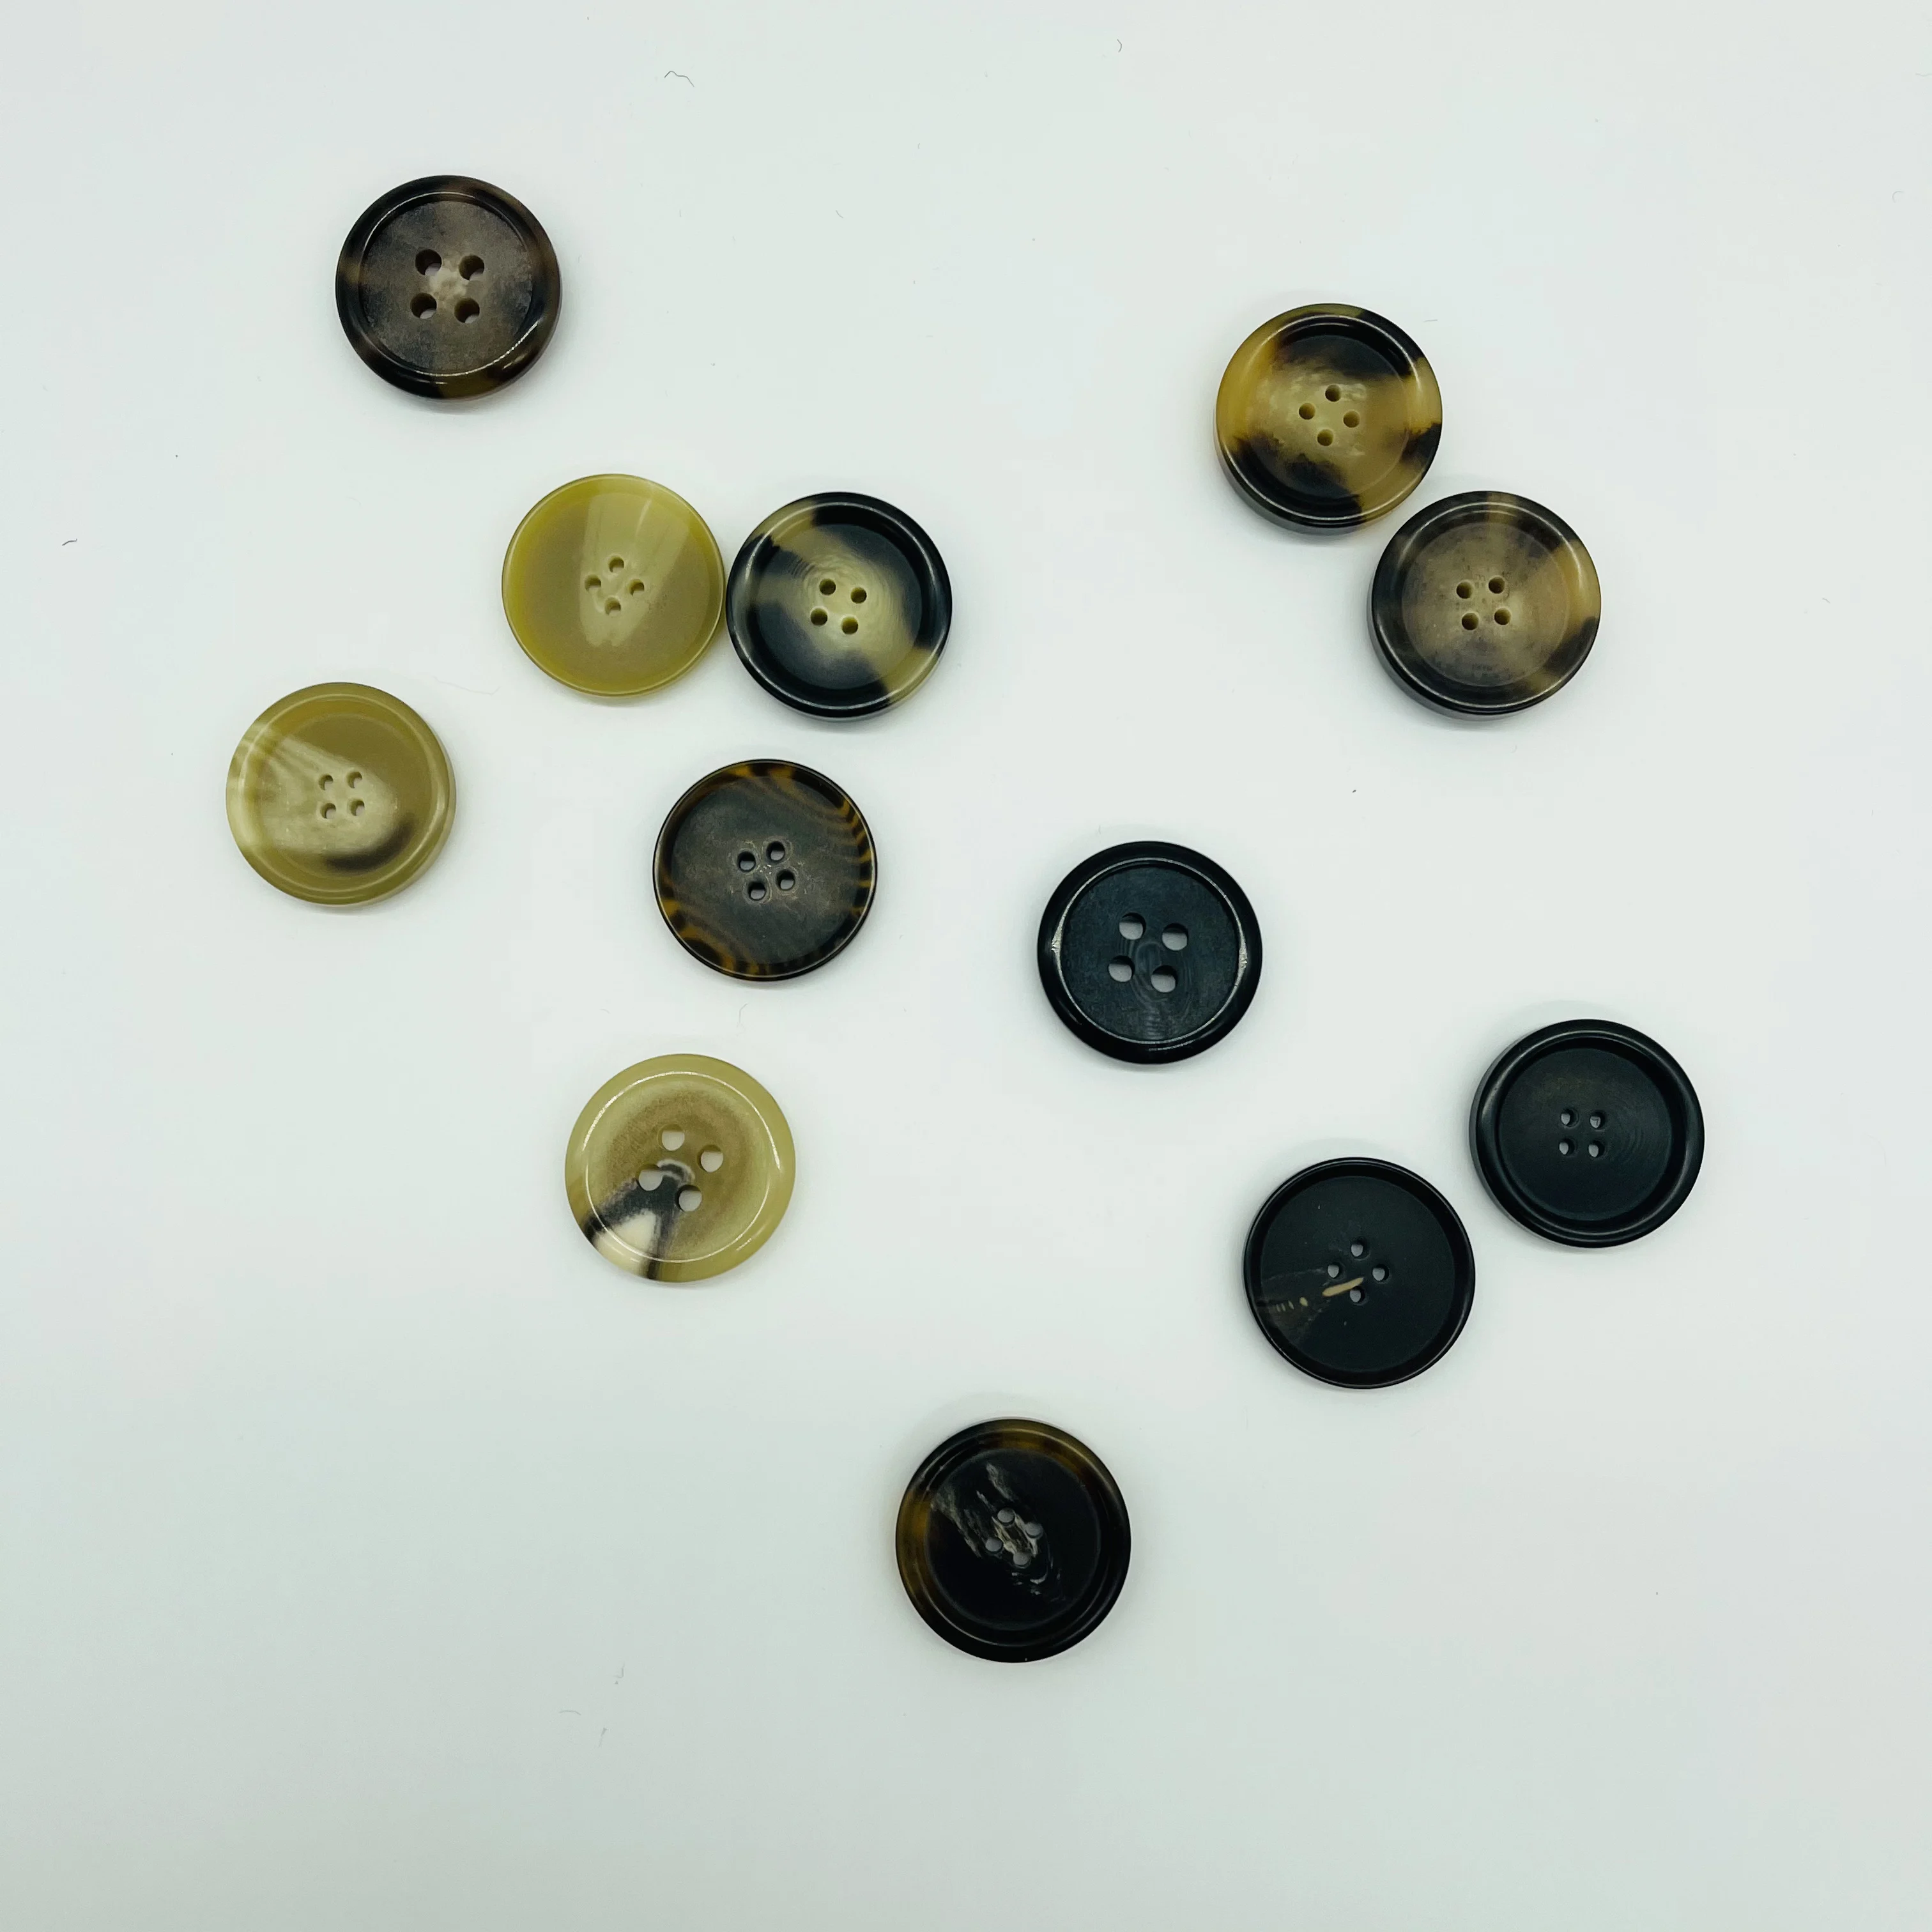 
High Tenacity Fast Delivery 14L 40L China Custom Buttons For Clothes And Jacket 